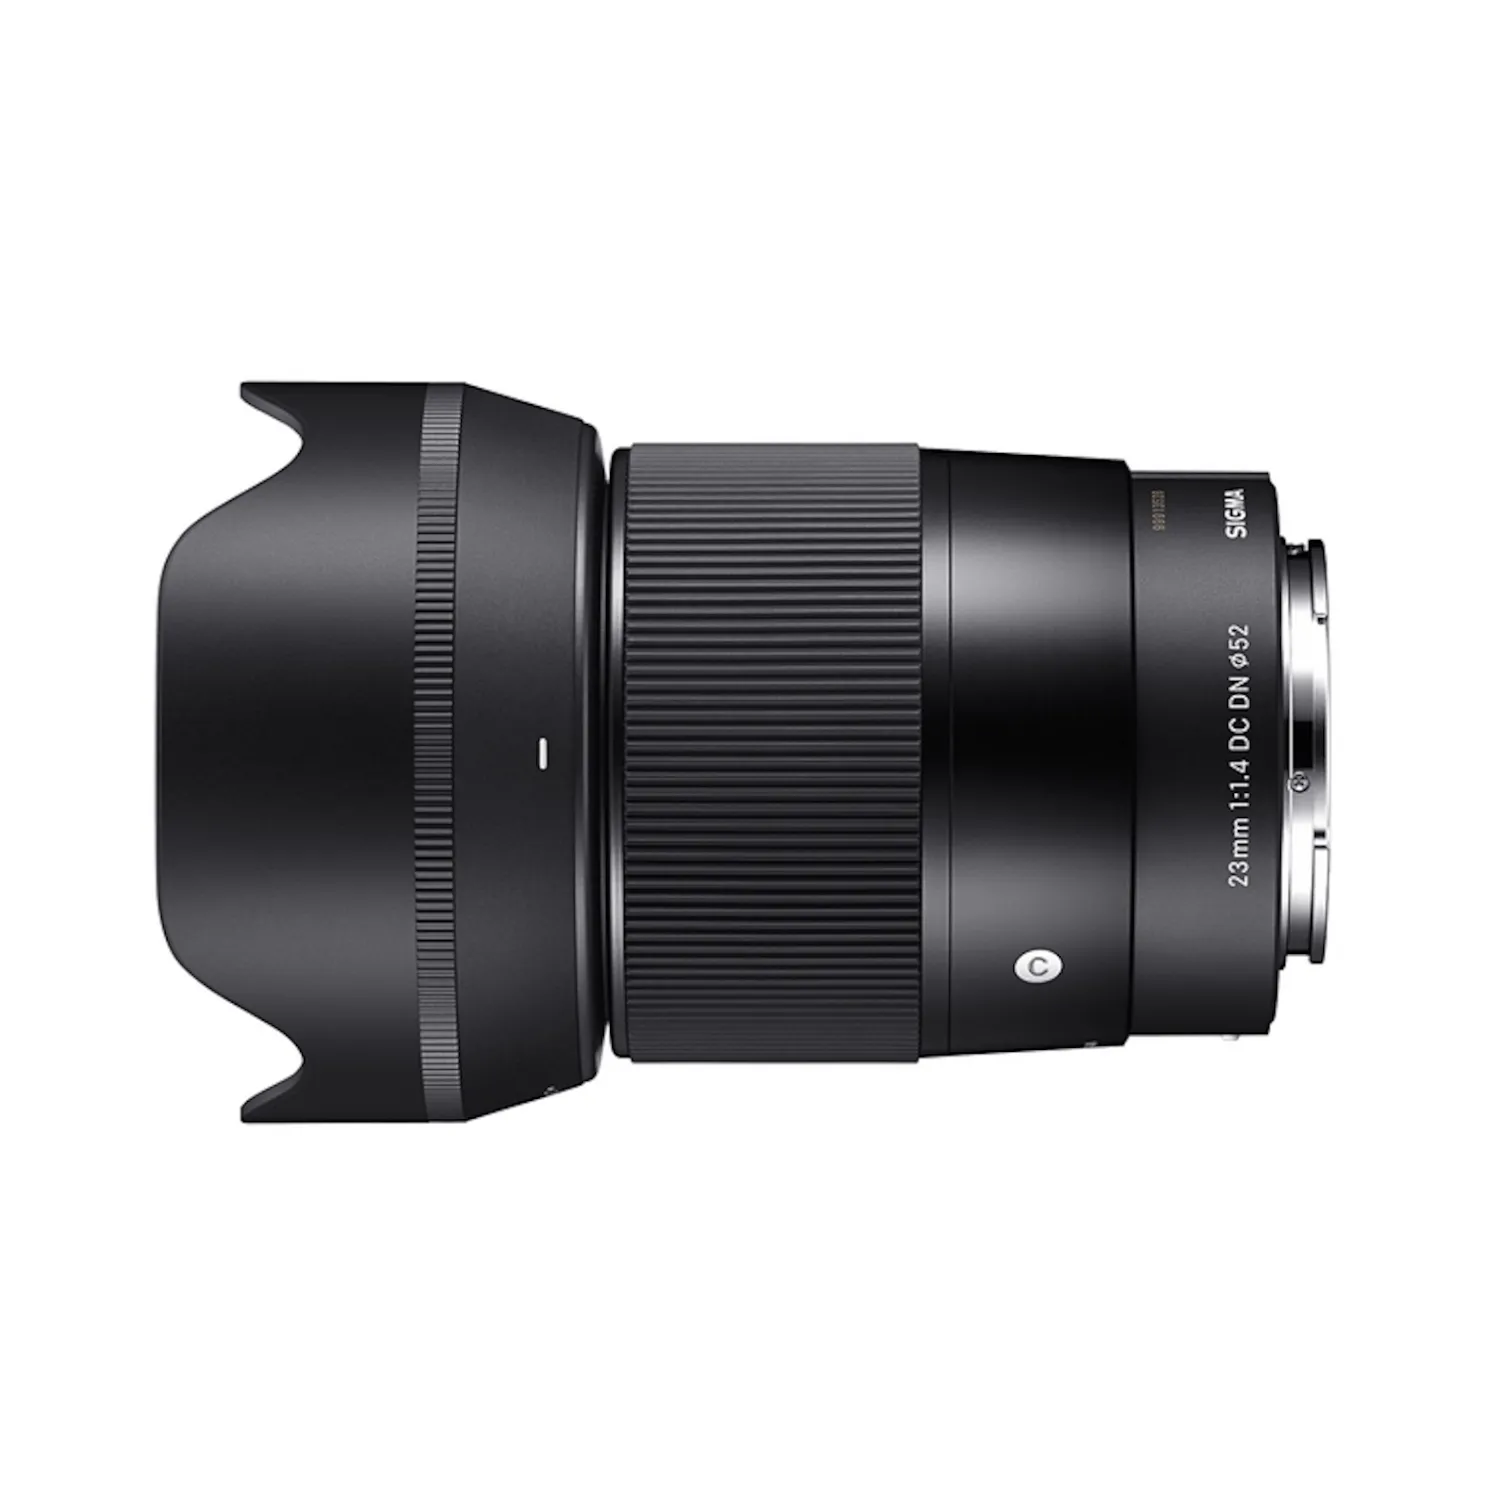 Sigma 23mm f/1.4 DC DN Contemporary Lens for Sony E-Mount